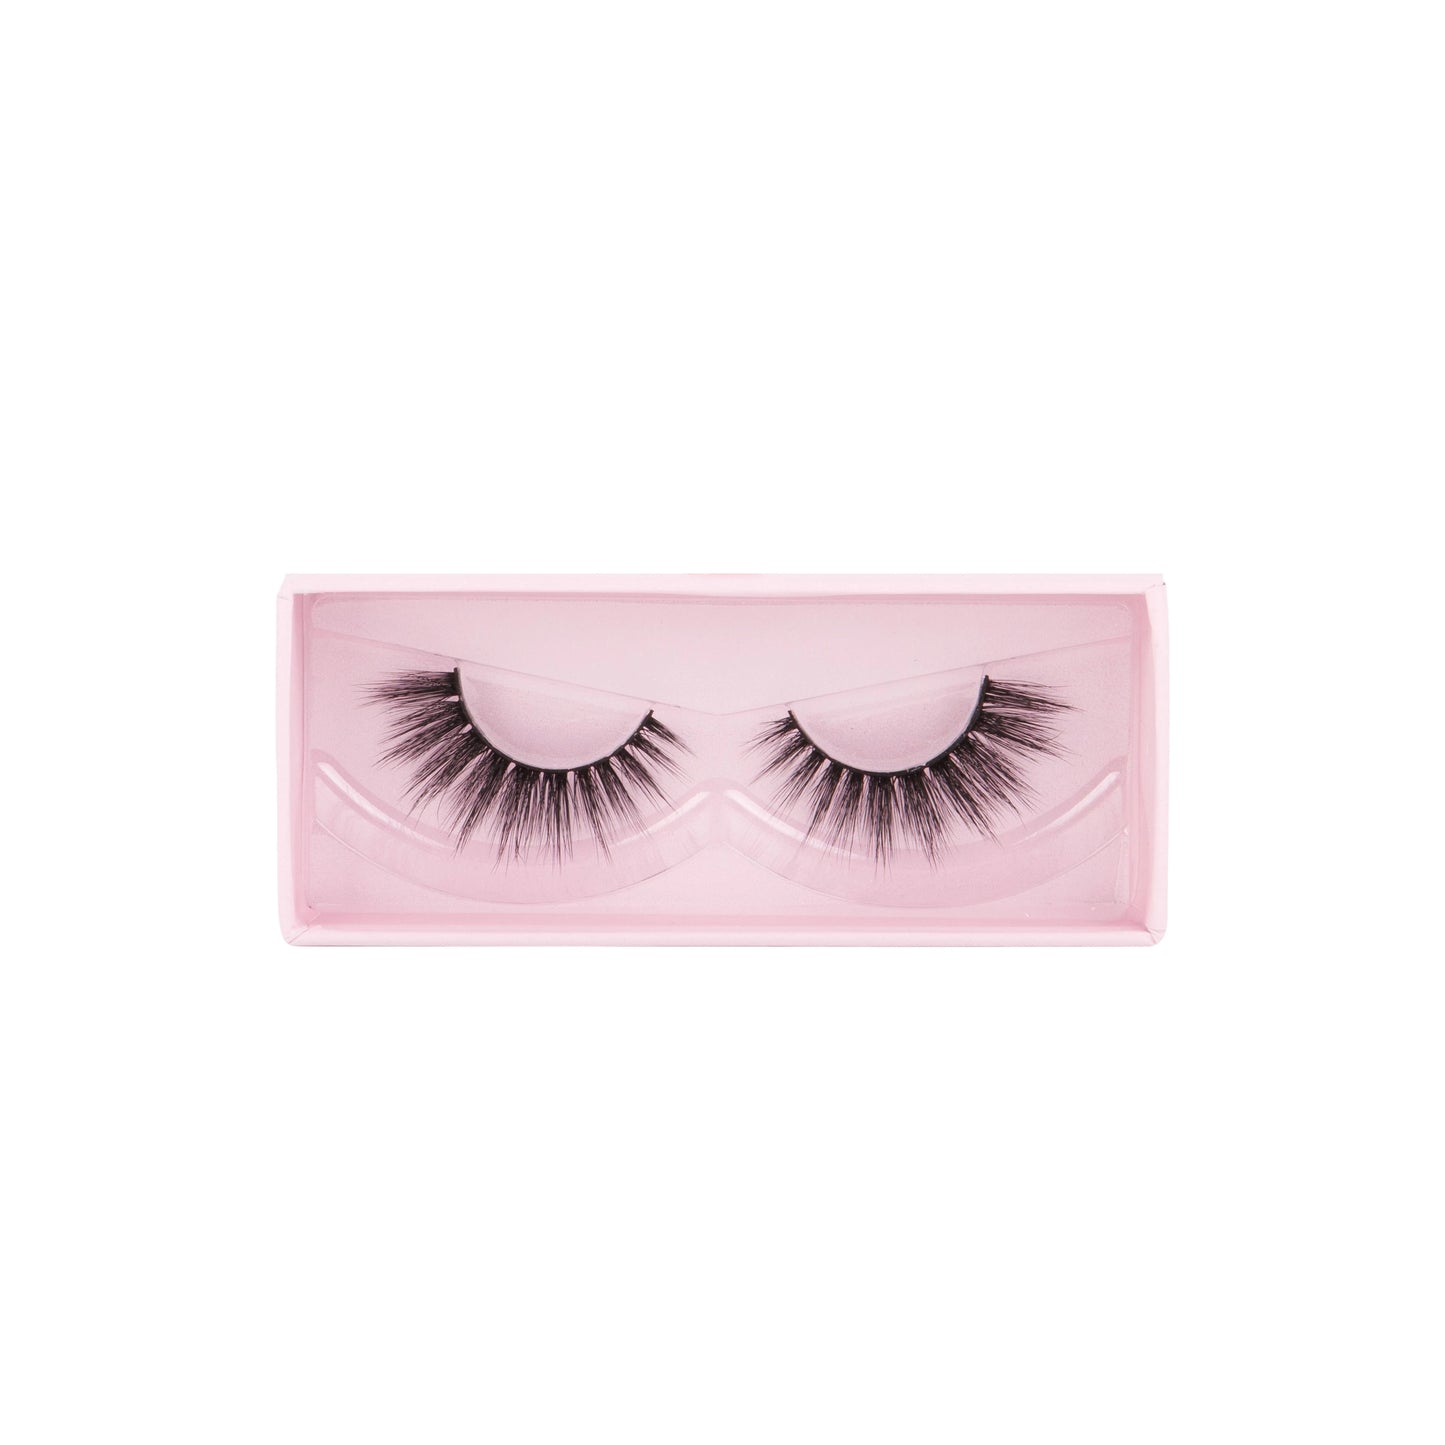 Thirsty - 3D Faux Silk Lashes